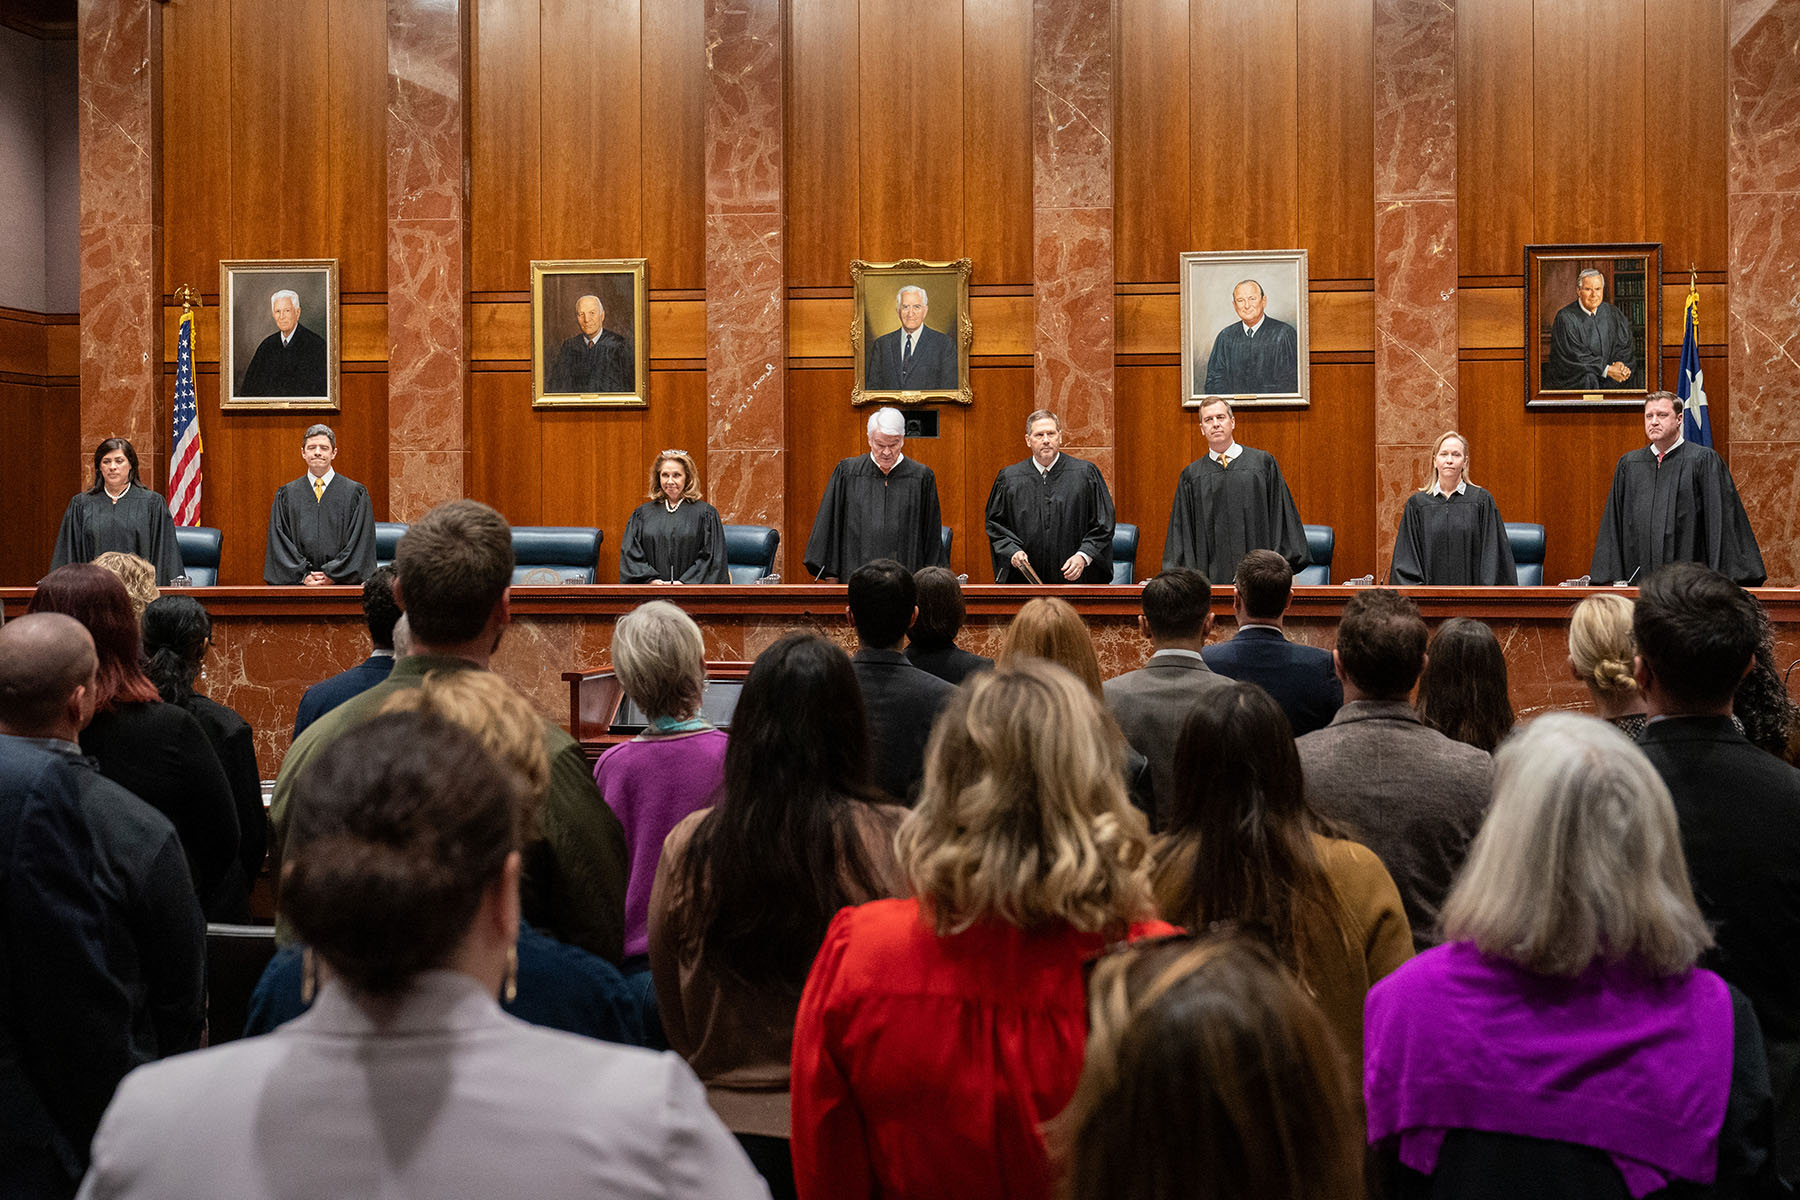 Justice Rebeca Aizpuru Huddle, Justice Brett Busby, Justice Debra Lehrmann, Chief Justice Nathan L. Hecht, Justice Jeff Boyd, Justice Jimmy Blacklock, Justice Jane Bland, and Justice Evan A. Young, of the Texas Supreme Court, arrive to hear litigators make their arguments at the Texas Supreme Court.